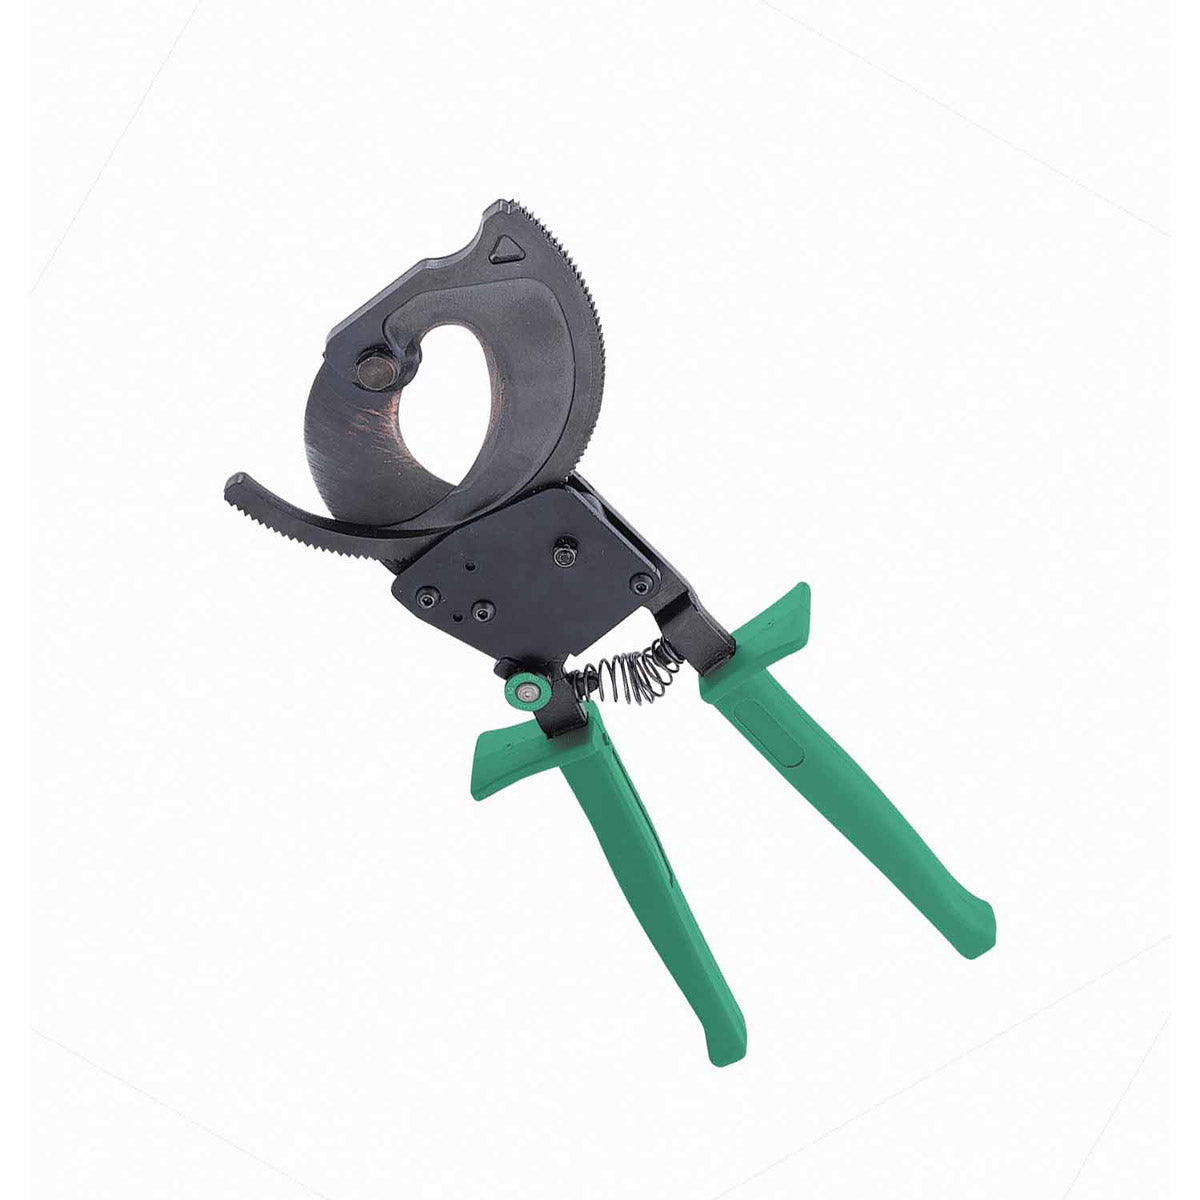 Greenlee 760 Compact Ratchet Cable Cutter